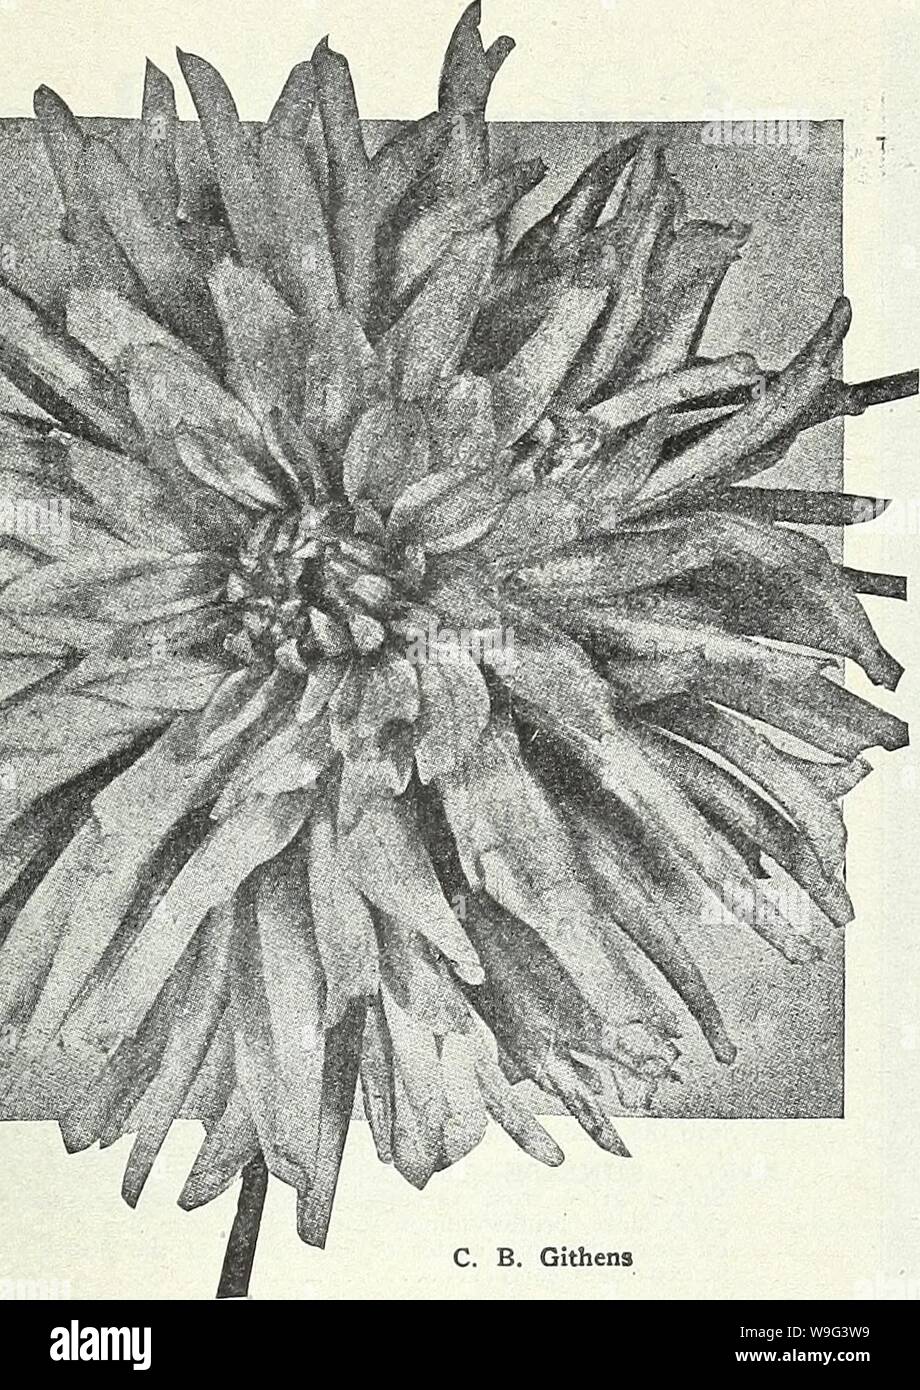 Archive image from page 104 of Currie's garden annual  spring. Currie's garden annual : spring 1931 56th year  curriesgardenann19curr Year: 1931 ( CURRIE BROTHERS CO. MILWAUKEE, WISCONSIN    C. B. Githens SHOW OR BALL DAHLIAS Each A. D. LIVONIâBeautiful soft pink, well formed flowers with long stems. Free- flowering- $0.25 D. M. MOOREâIn this offering we have one of the best 'nearly black' varieties to date. It is a rich, deep, velvety Victoria-lake, which is a shade deeper than deep maroon 35 MAUDE ADAMS. (Alexander)âThe color is a pure snowy white, very effec- tively overlaid clear delicate Stock Photo